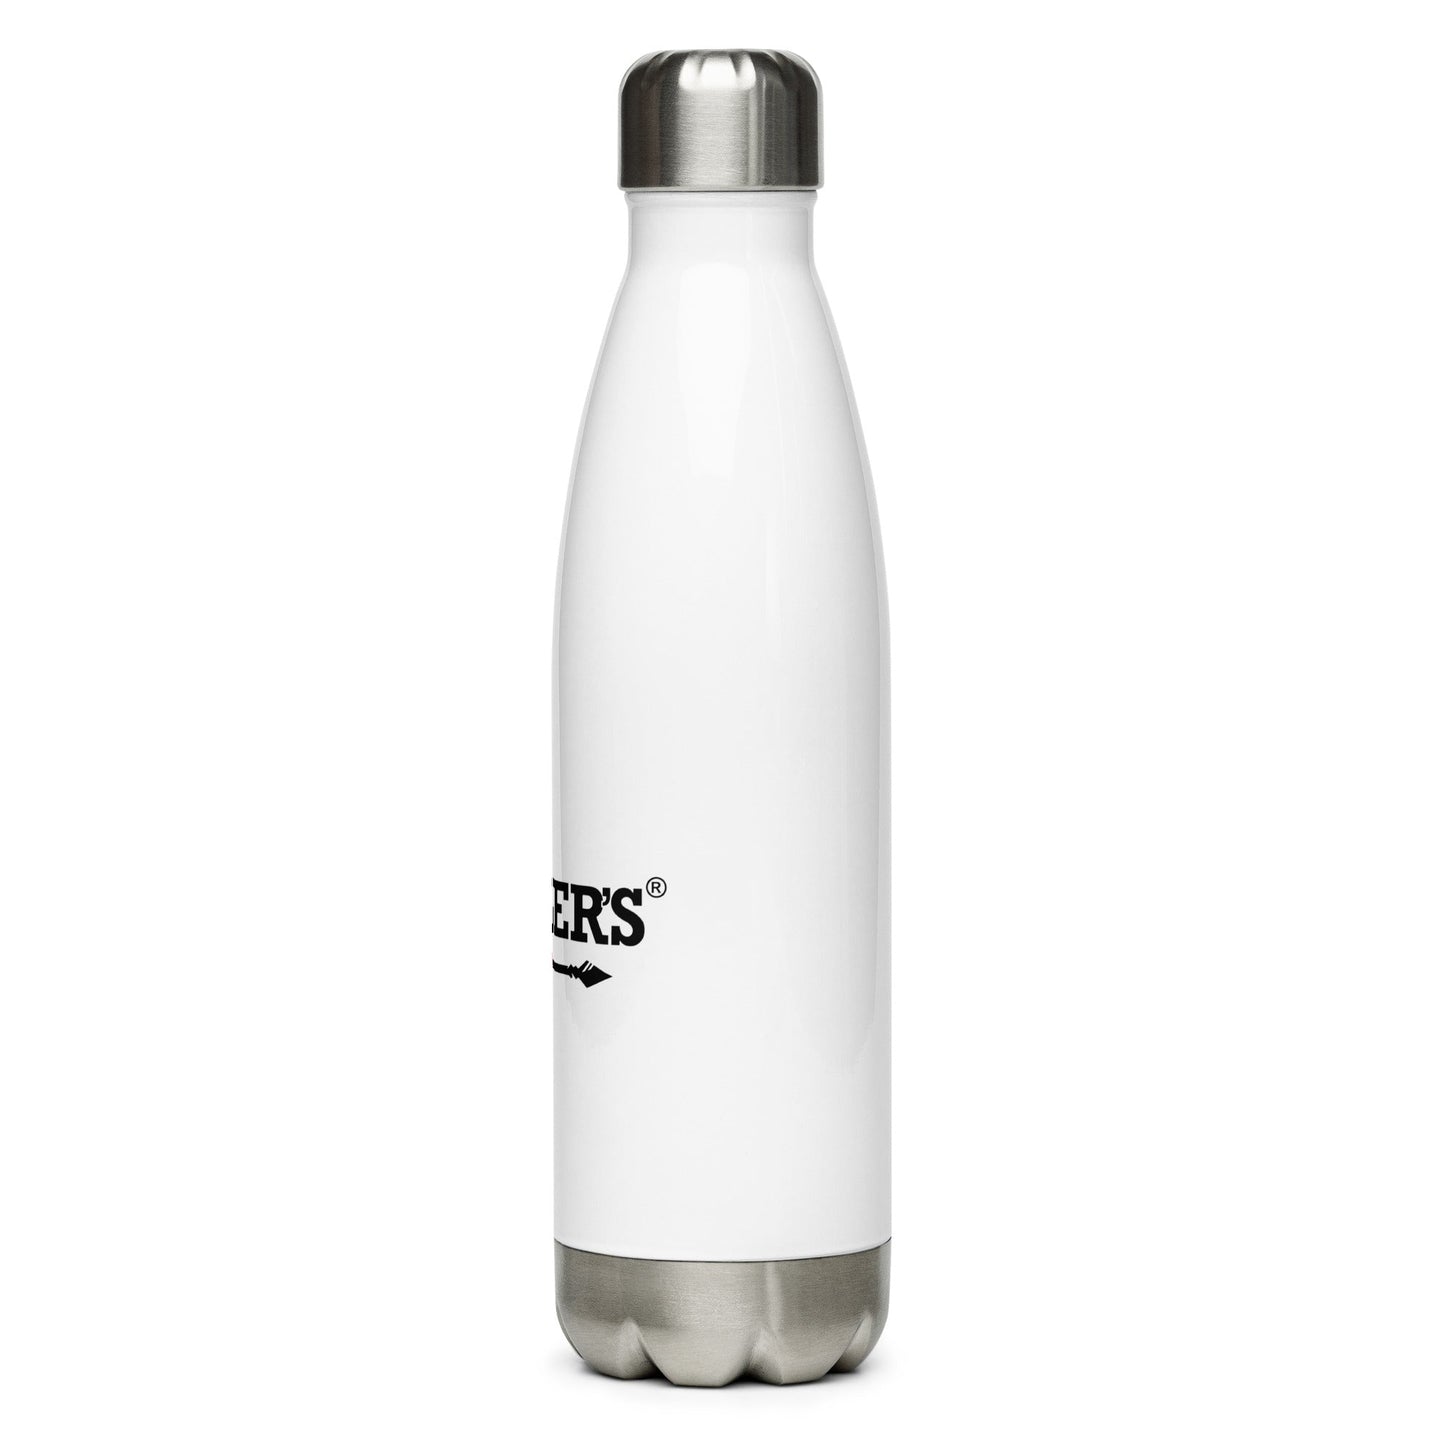 Chyler’s® Water Bottle - Chylers